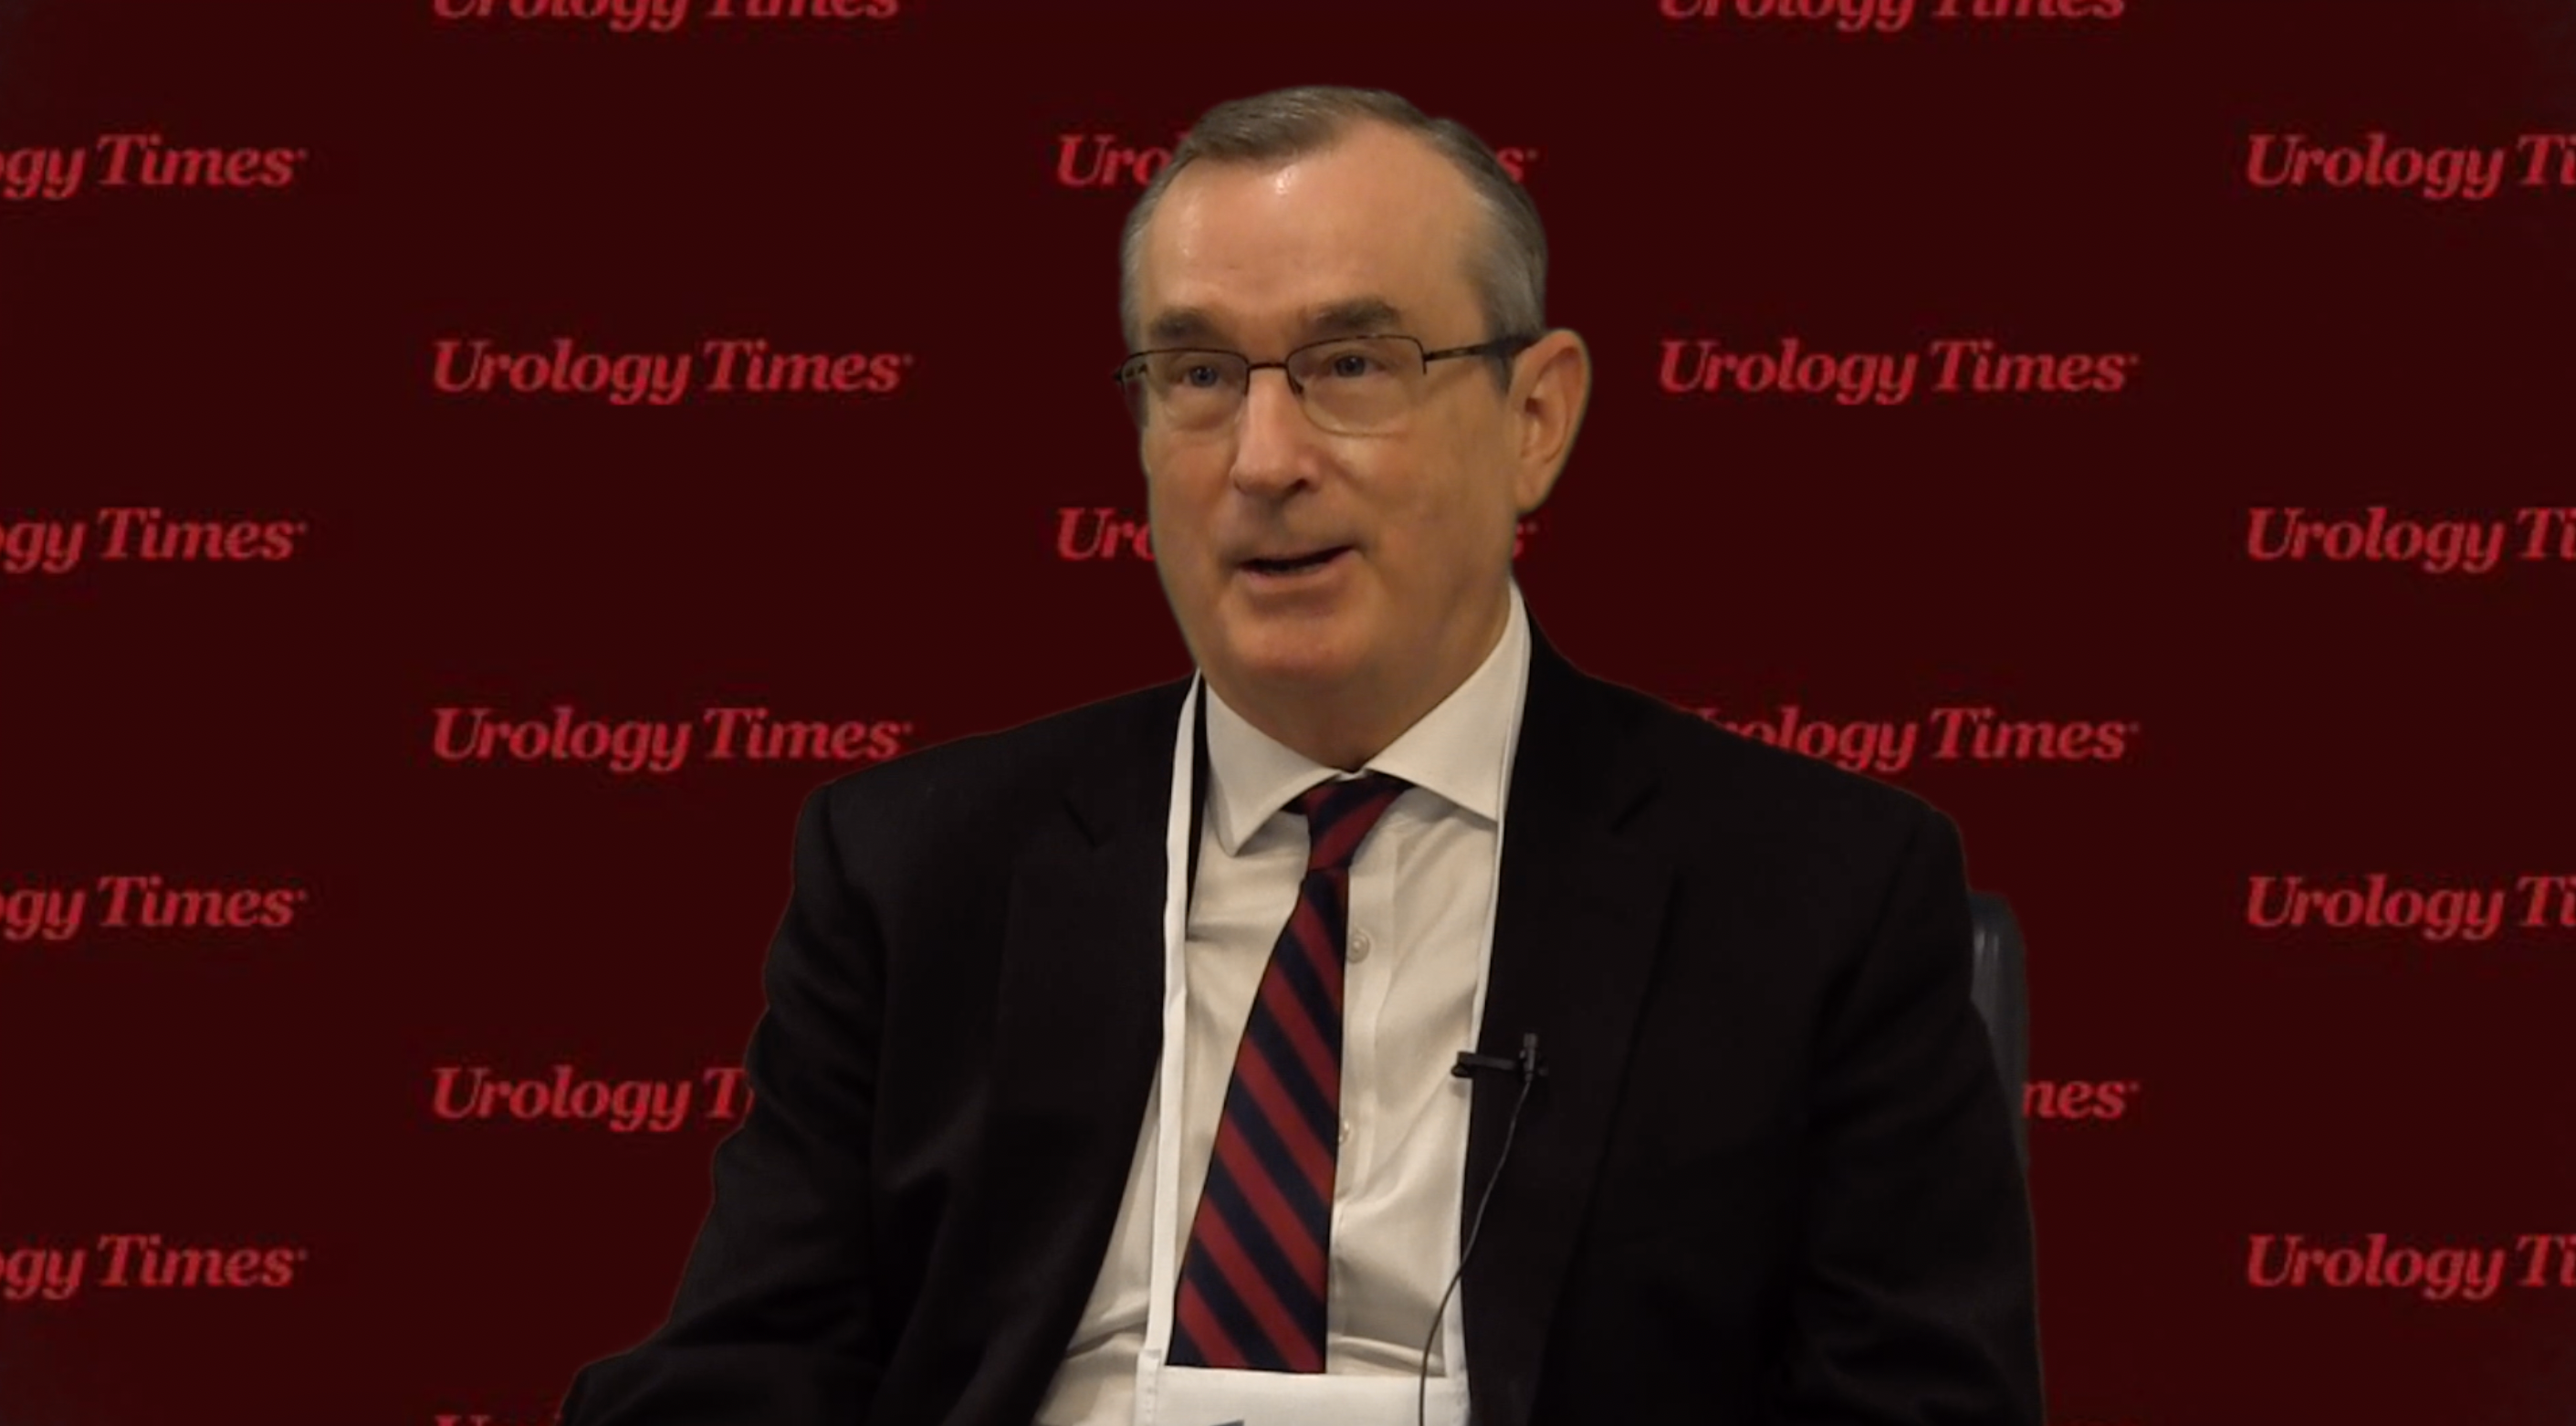 Dr. Humphrey discusses takeaways from NY GU 2022 in RCC/bladder cancer